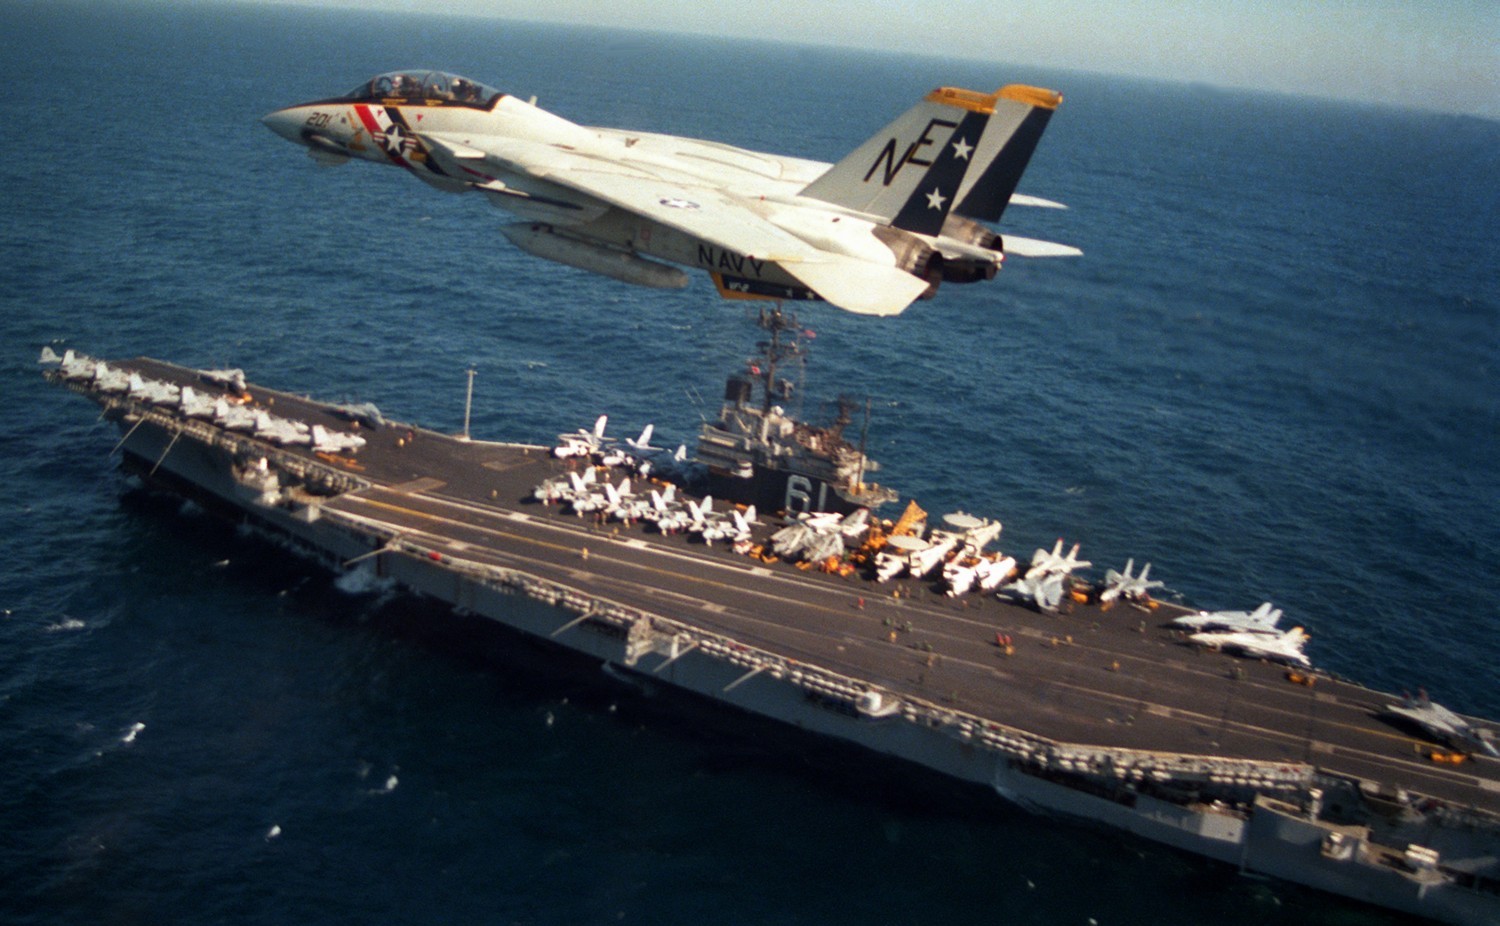 vf-2 bounty hunters fighter squadron fitron f-14a tomcat carrier air wing cvw-2 uss ranger cv-61 85